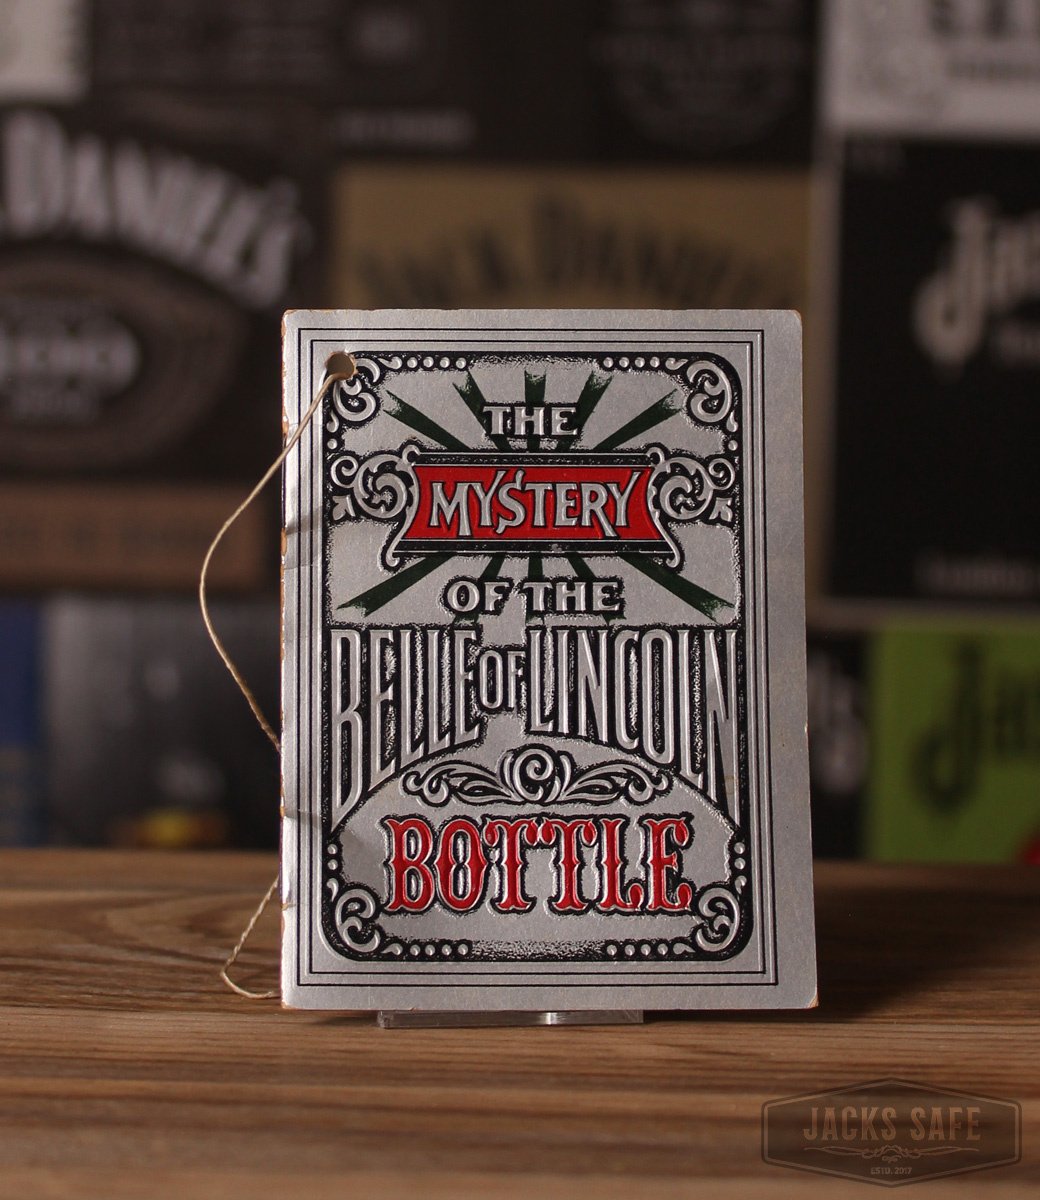 JACK DANIEL'S - Belle of Lincoln - TAG only